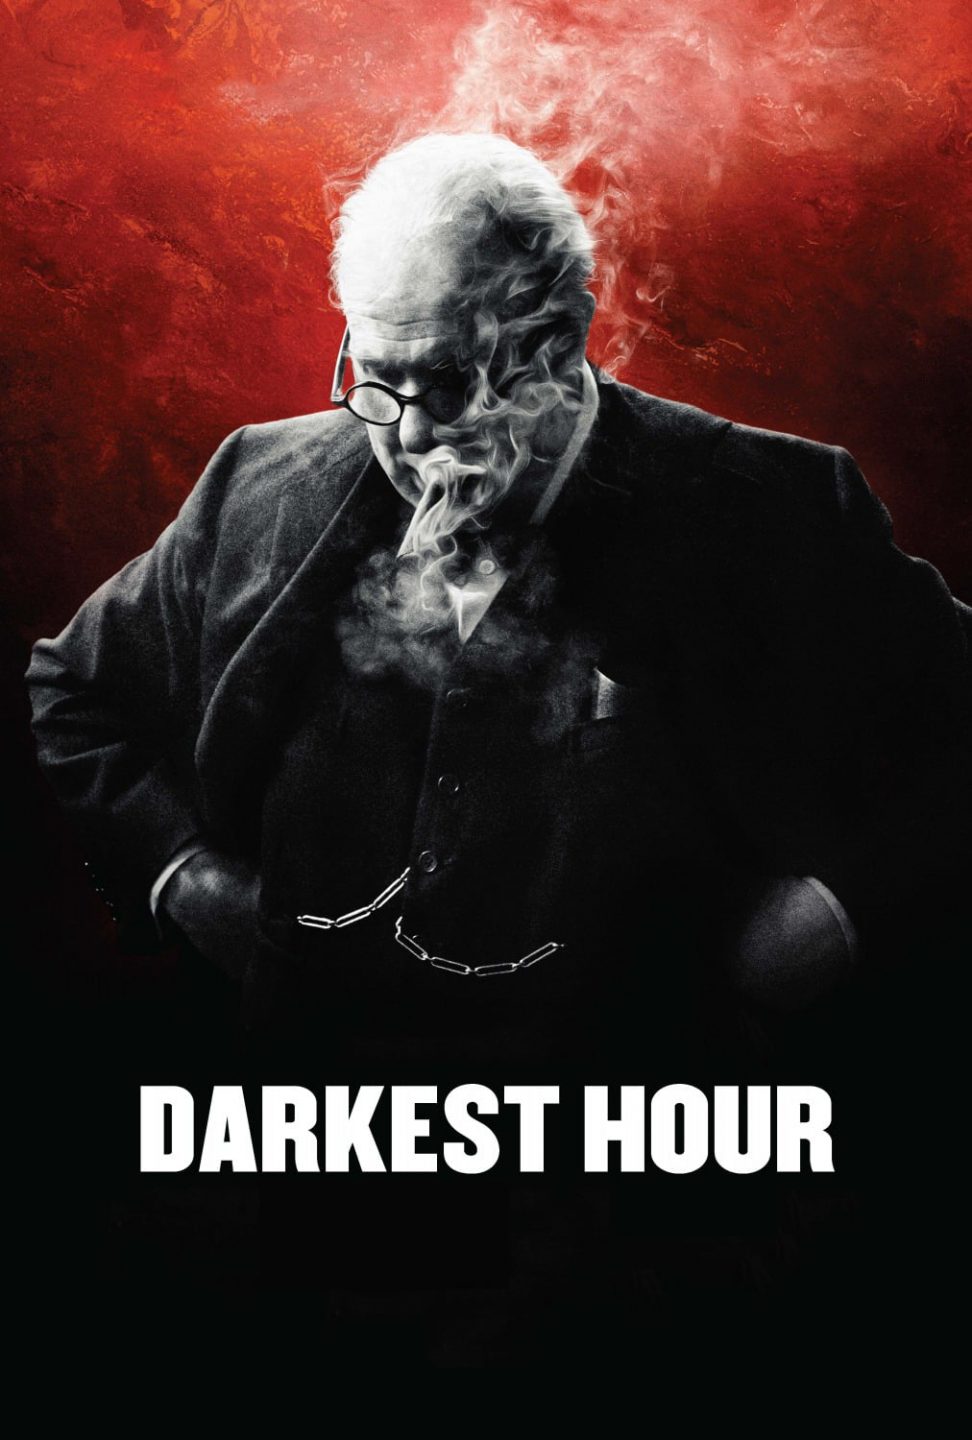 Poster for the movie "Darkest Hour"